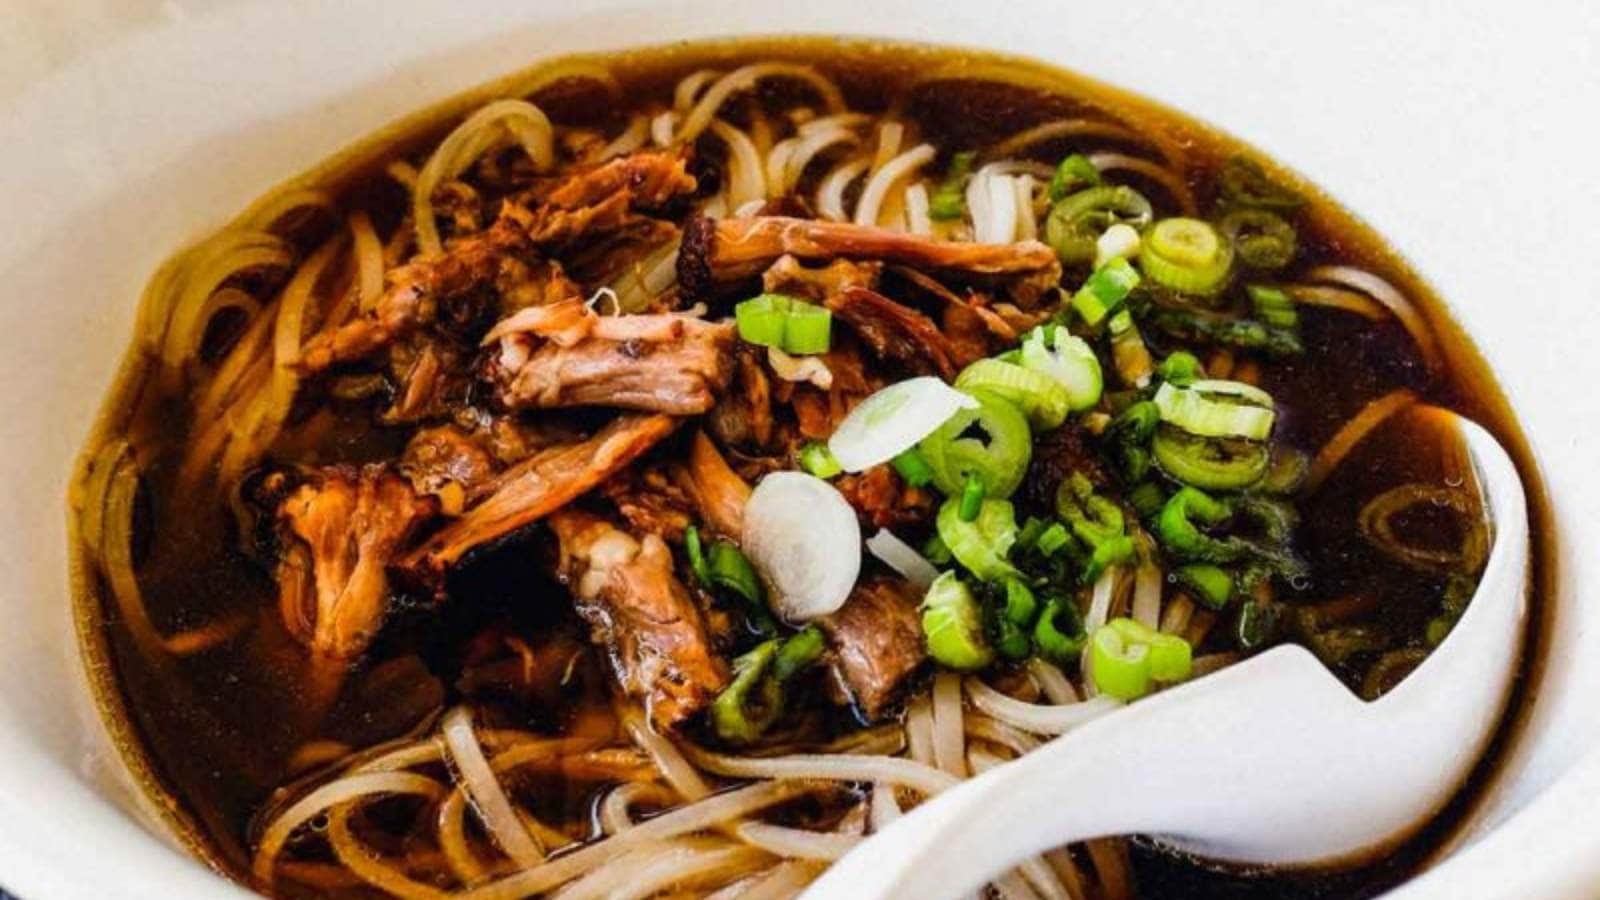 Chinese Oxtail Soup recipe by Cook Eat World.